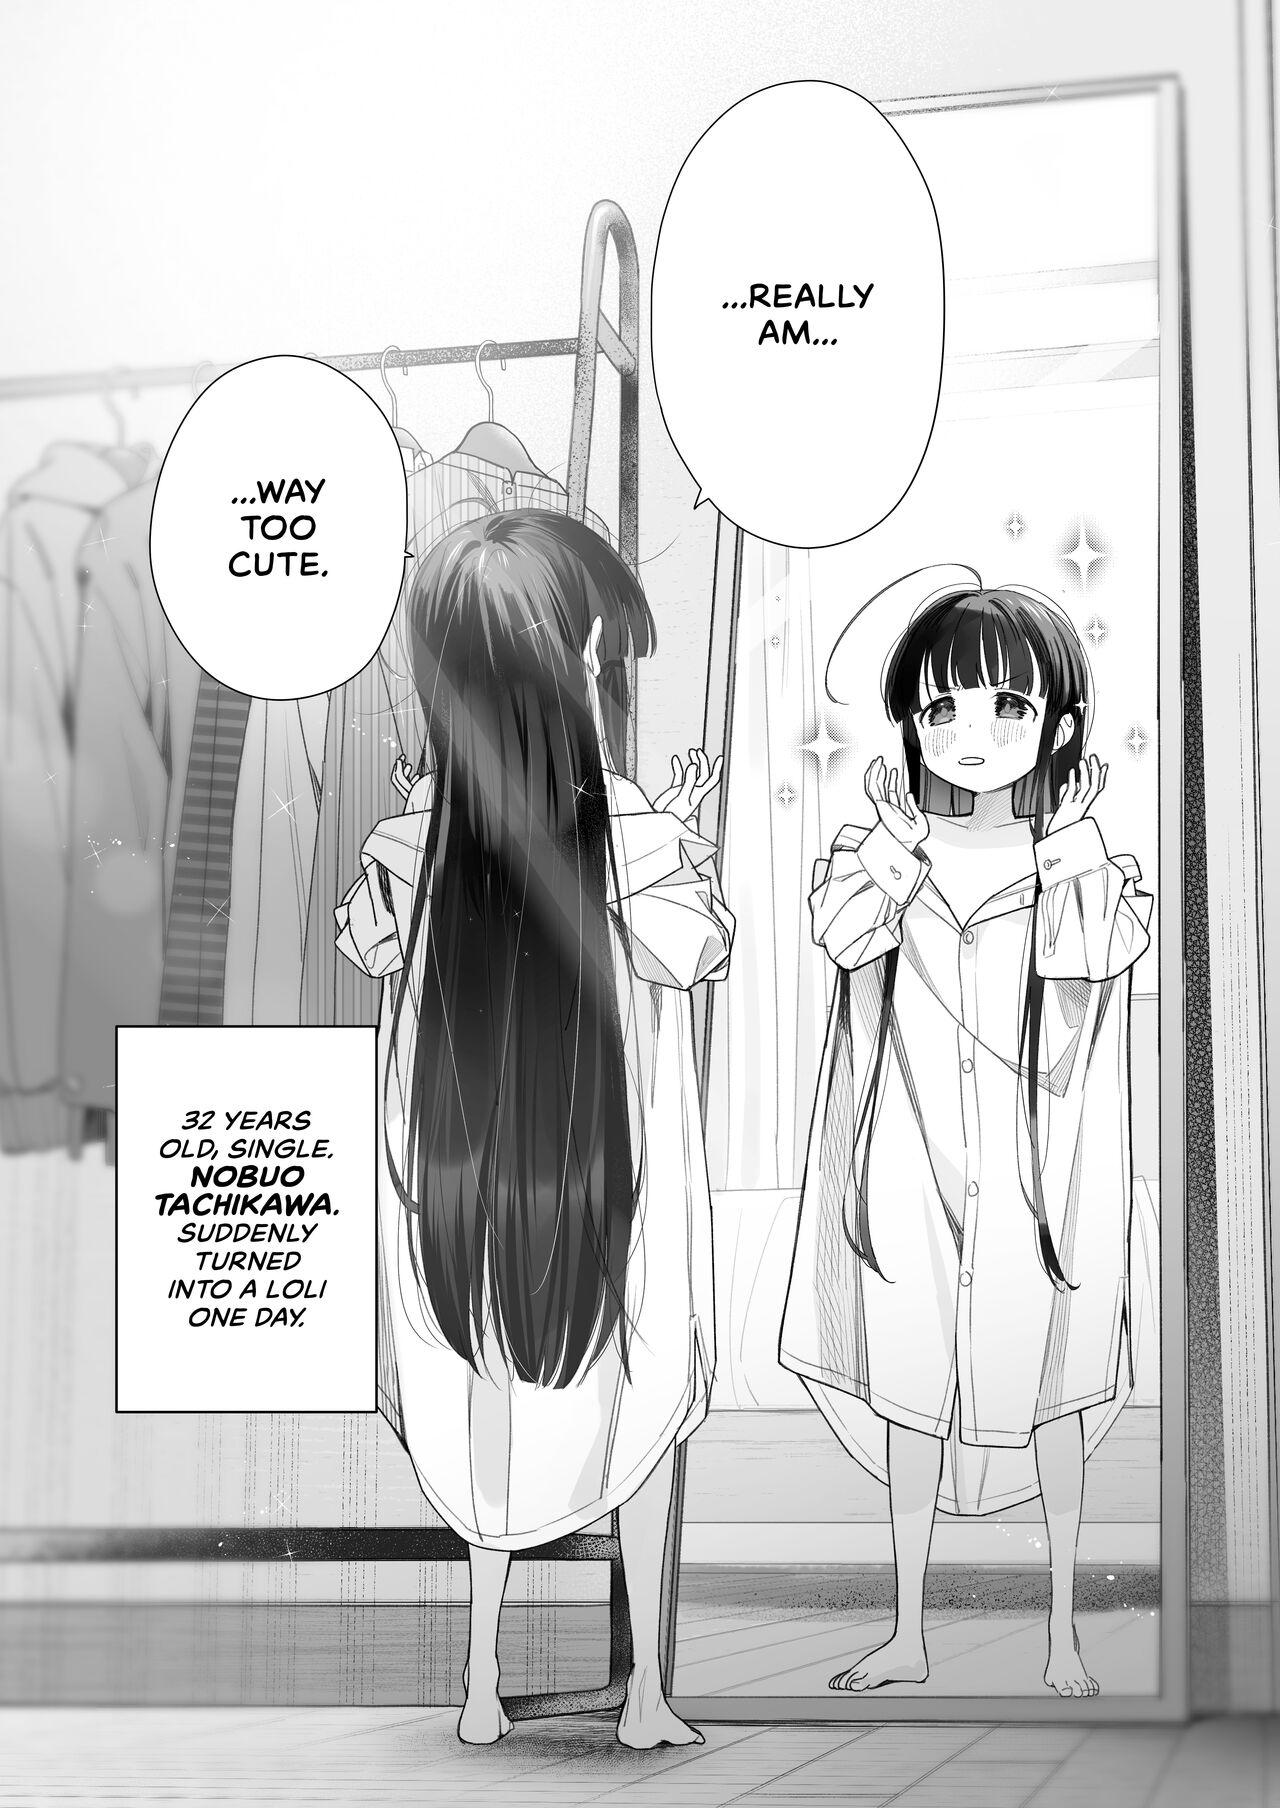 Big Boobs [Asunaro Neat. (Ronna)] TS Loli Oji-san no Bouken Onanie Hen | The Adventures of an Old Man Who Was Gender-Swapped Into a Loli ~Masturbation Chapter~ [English] [CulturedCommissions] [Digital] - Original Girl Gets Fucked - Picture 3